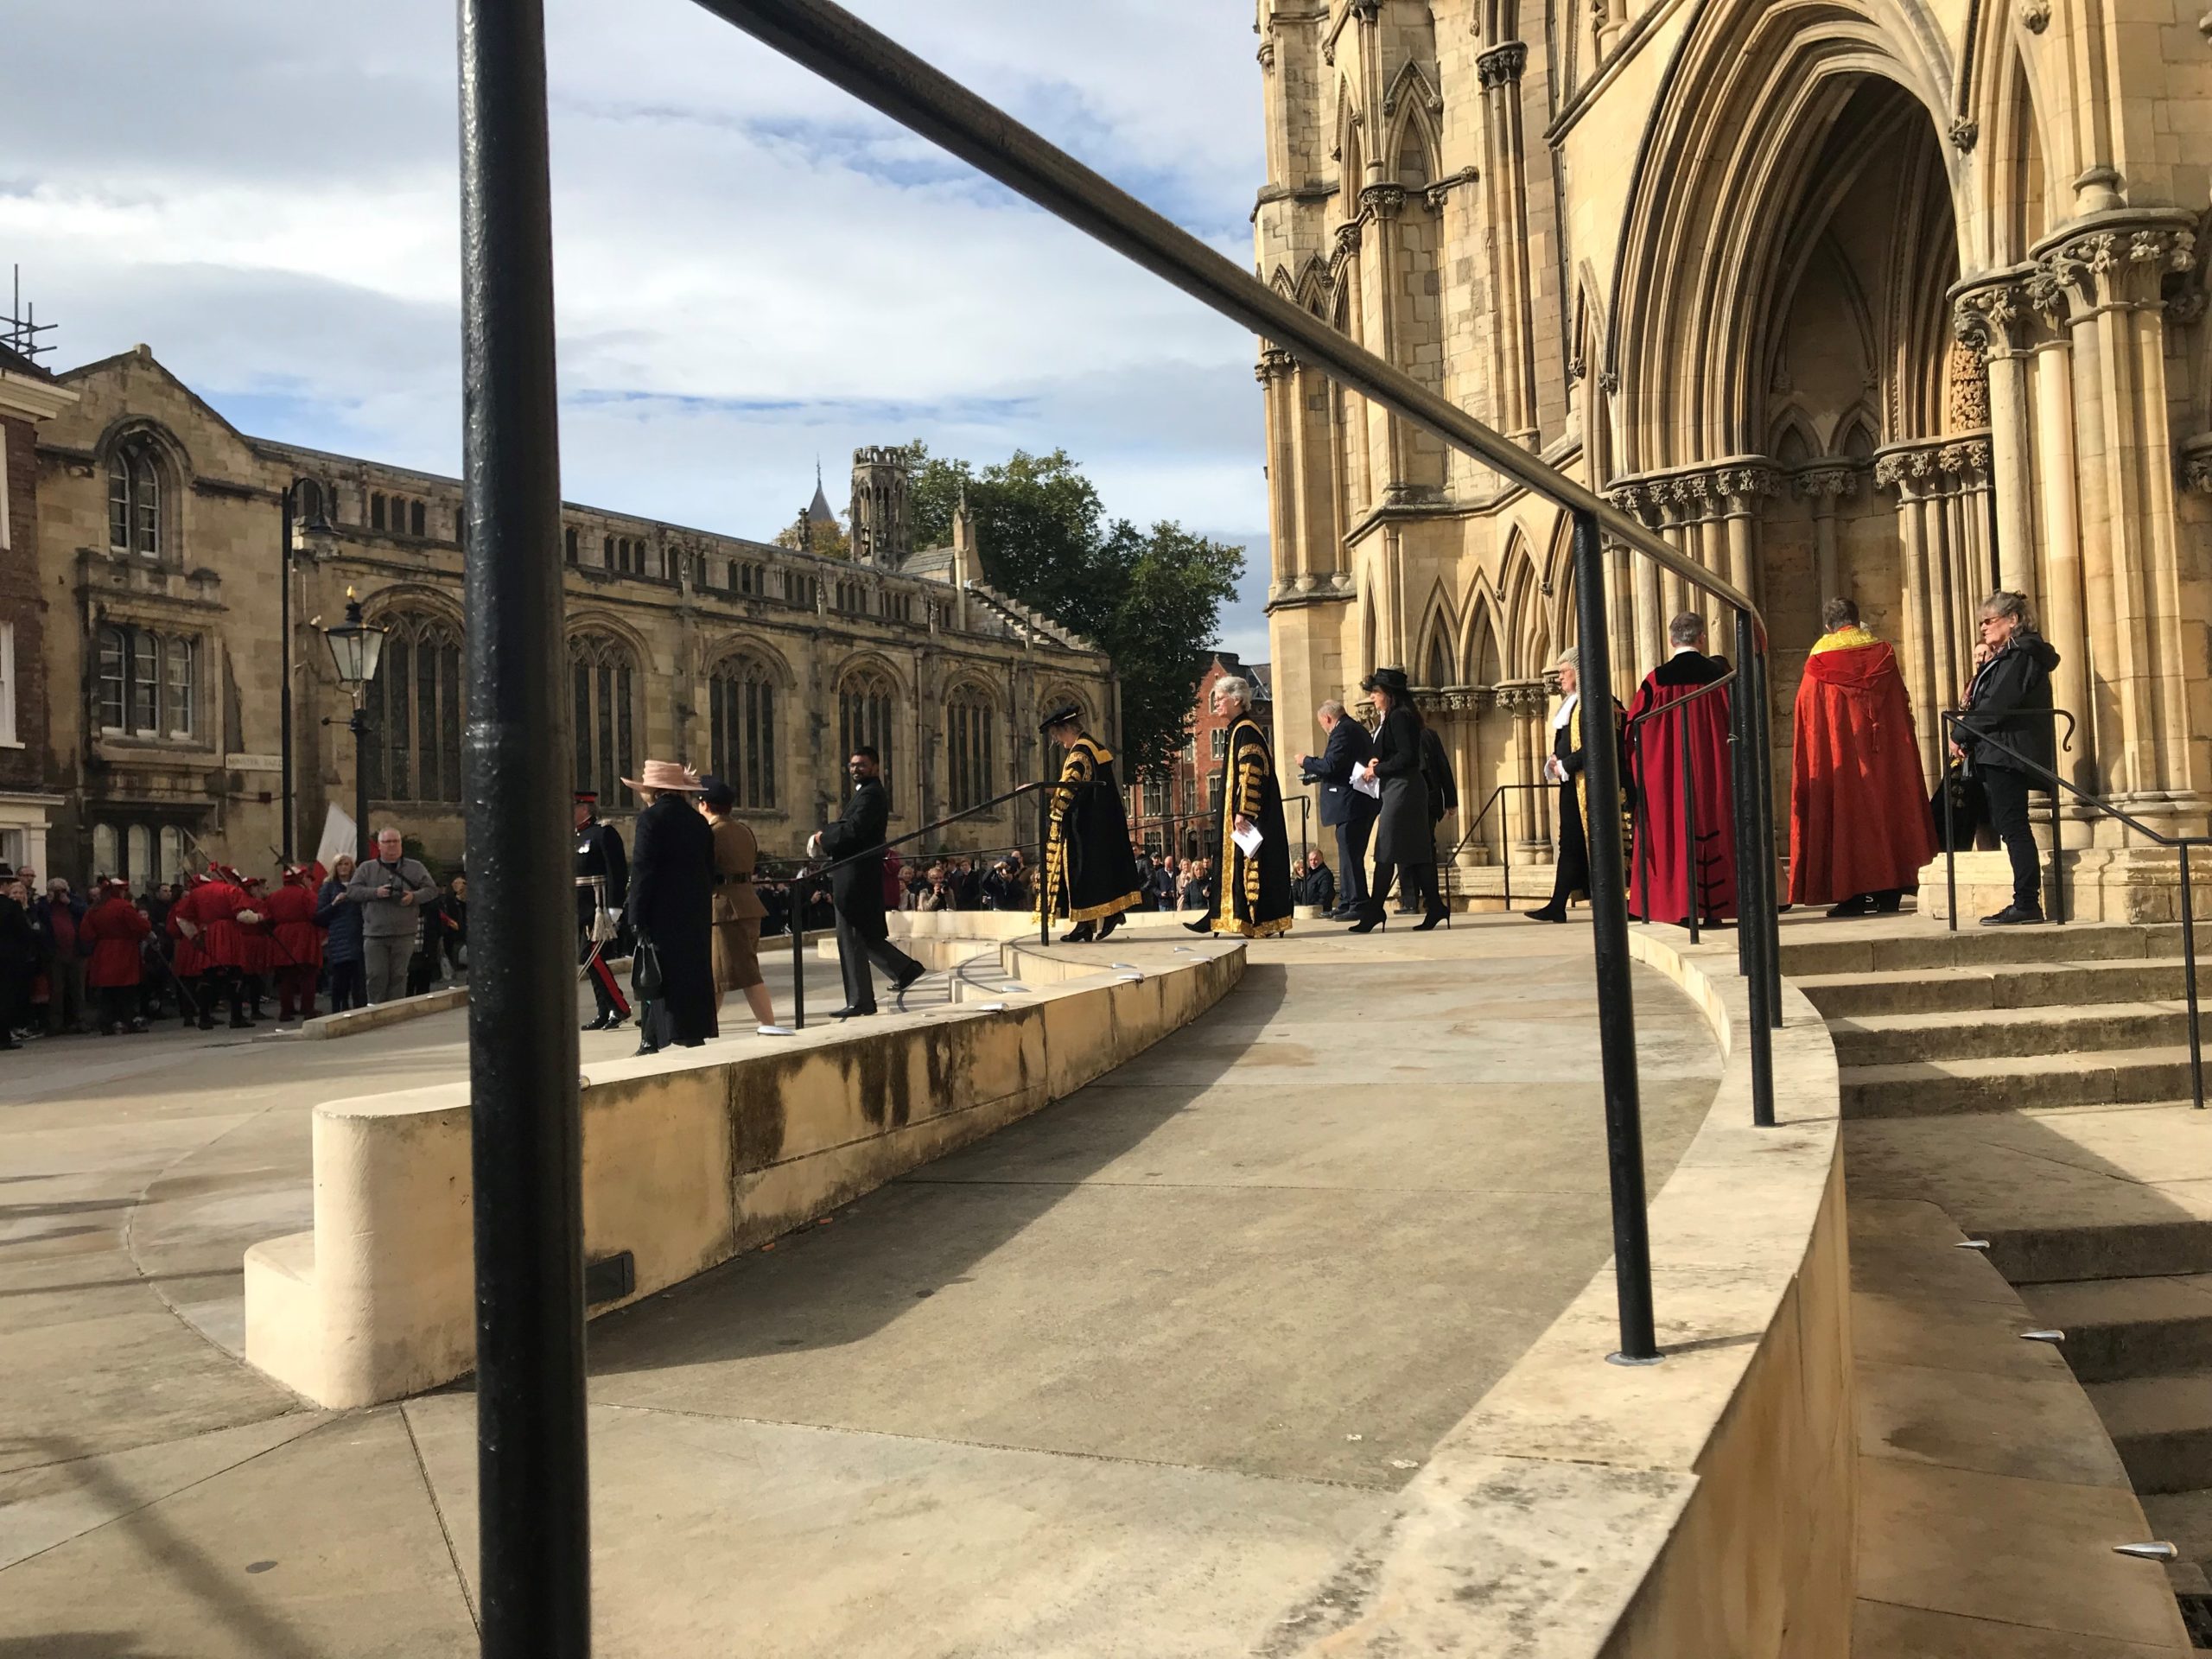 Annual Legal Service at York Minster